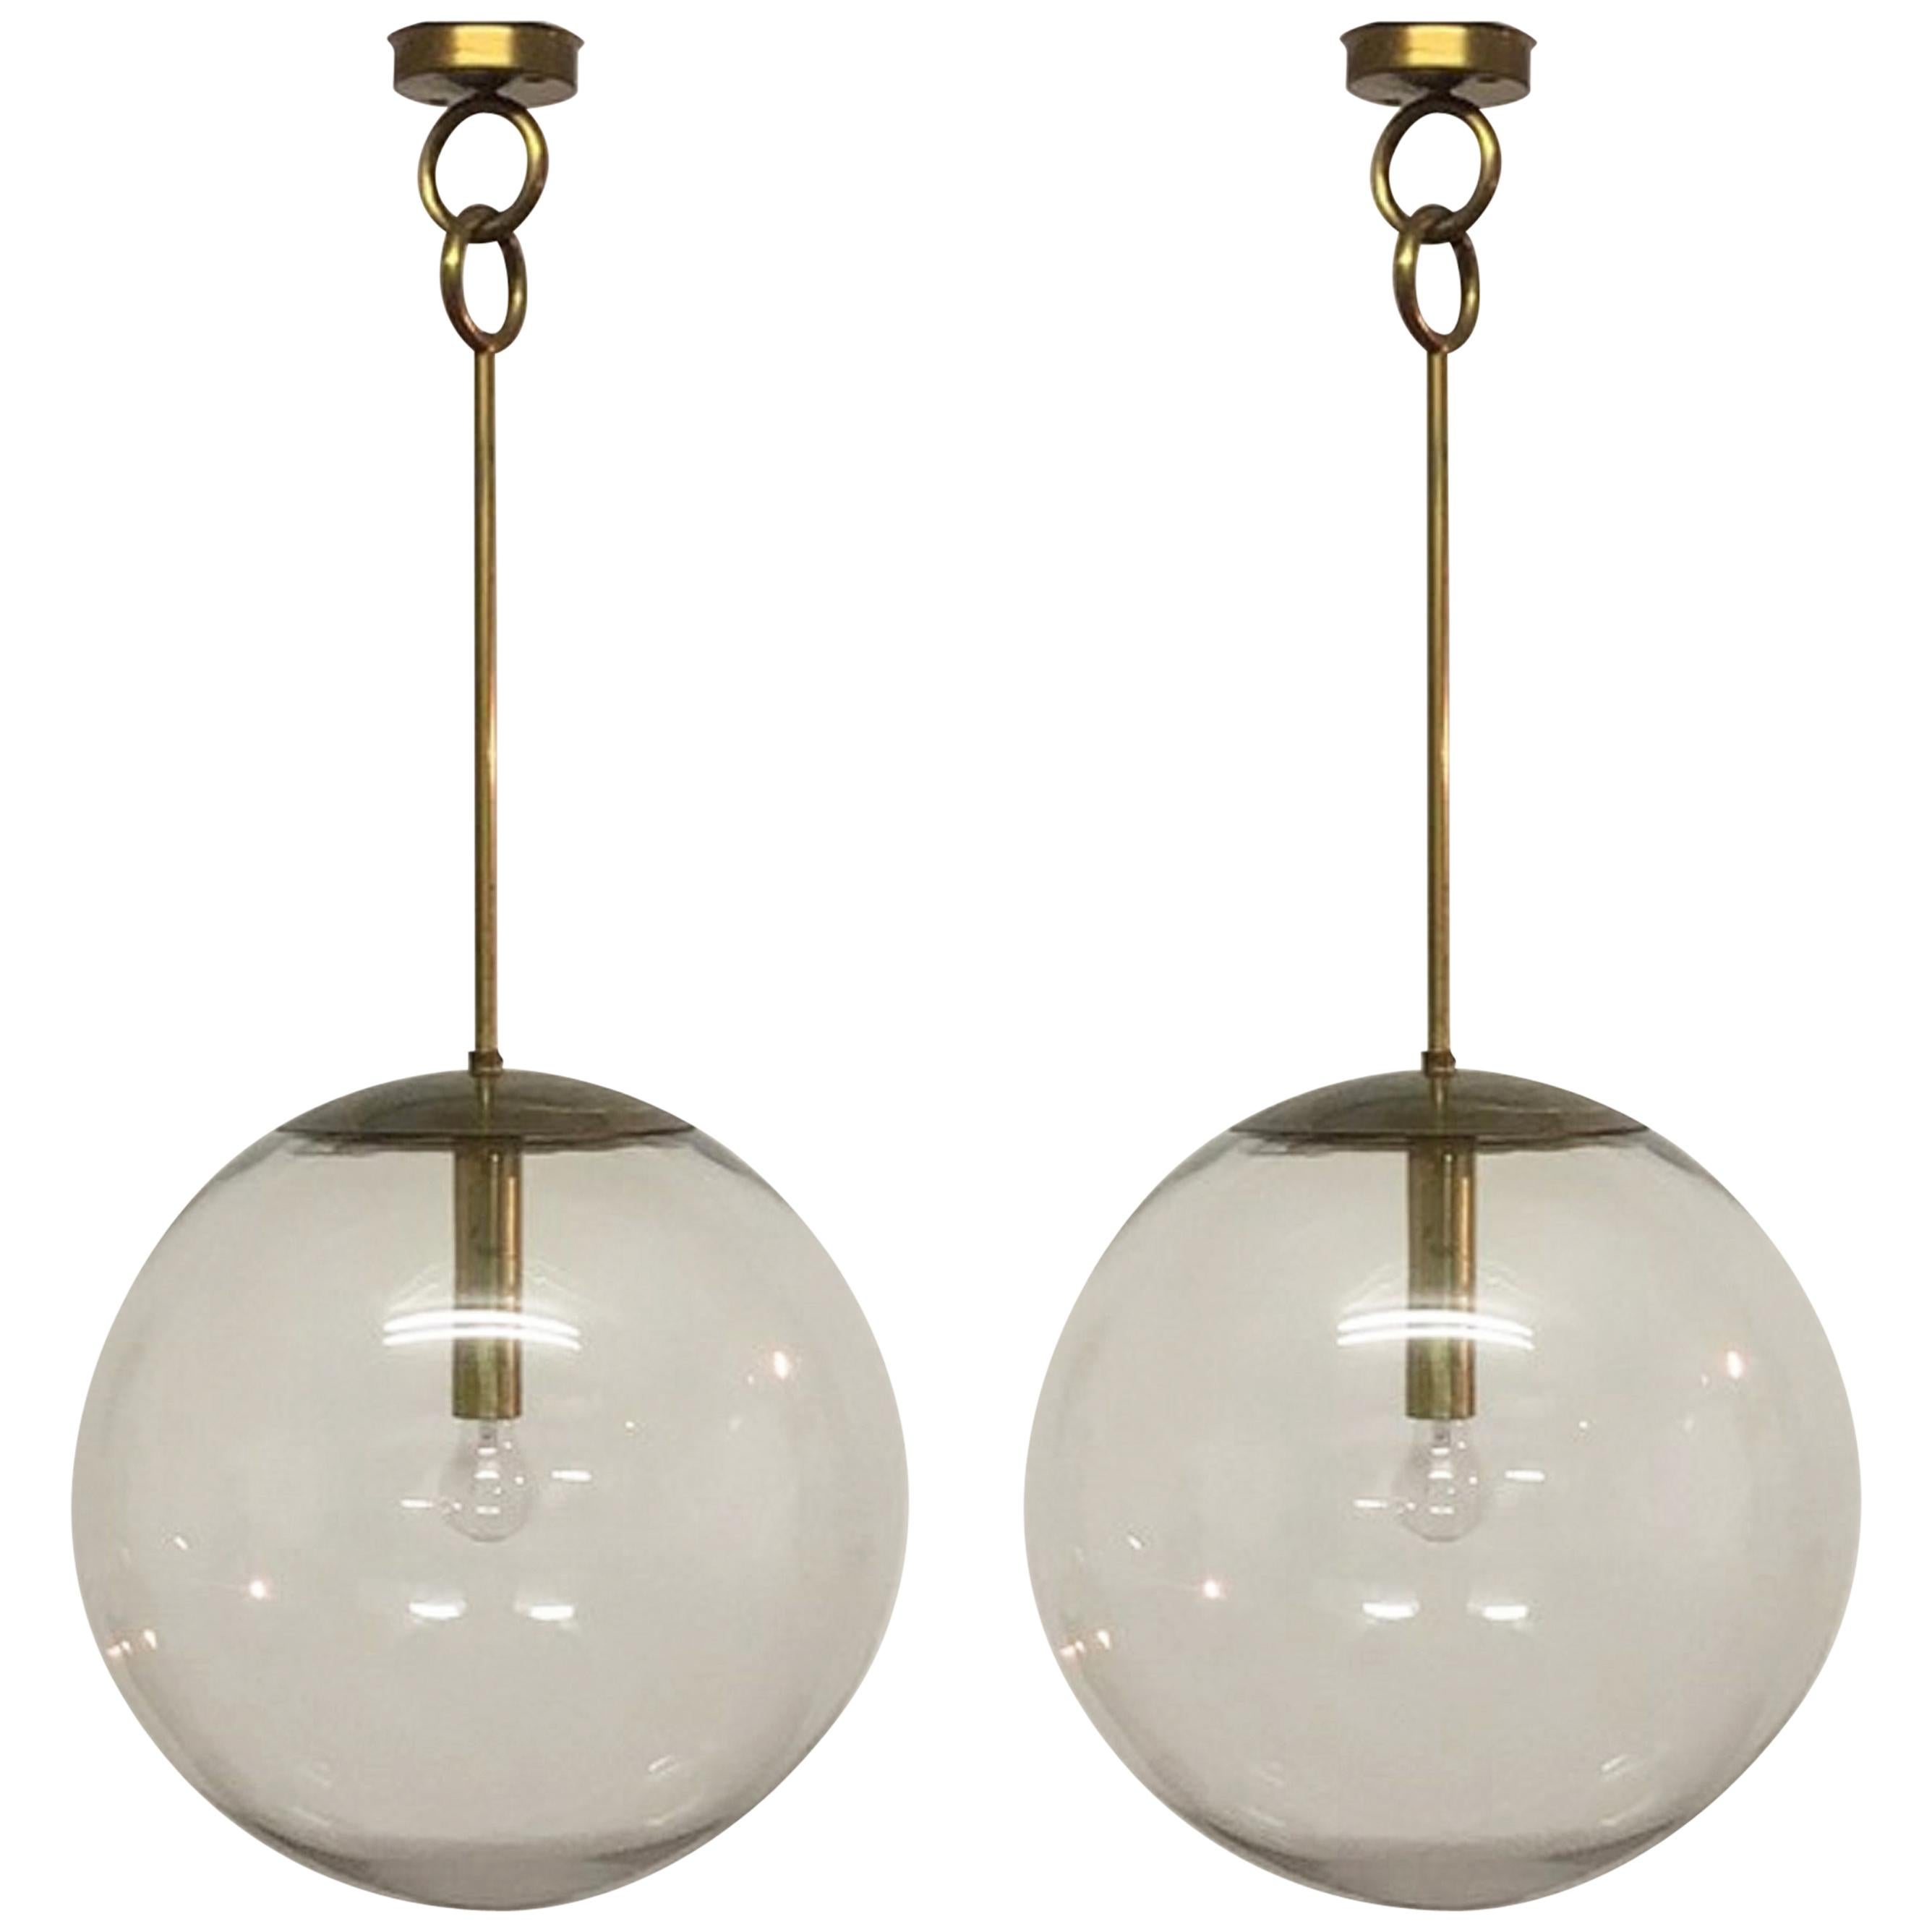 Pair of Large Midcentury Glass Globes Pendants, Germany, circa 1960s